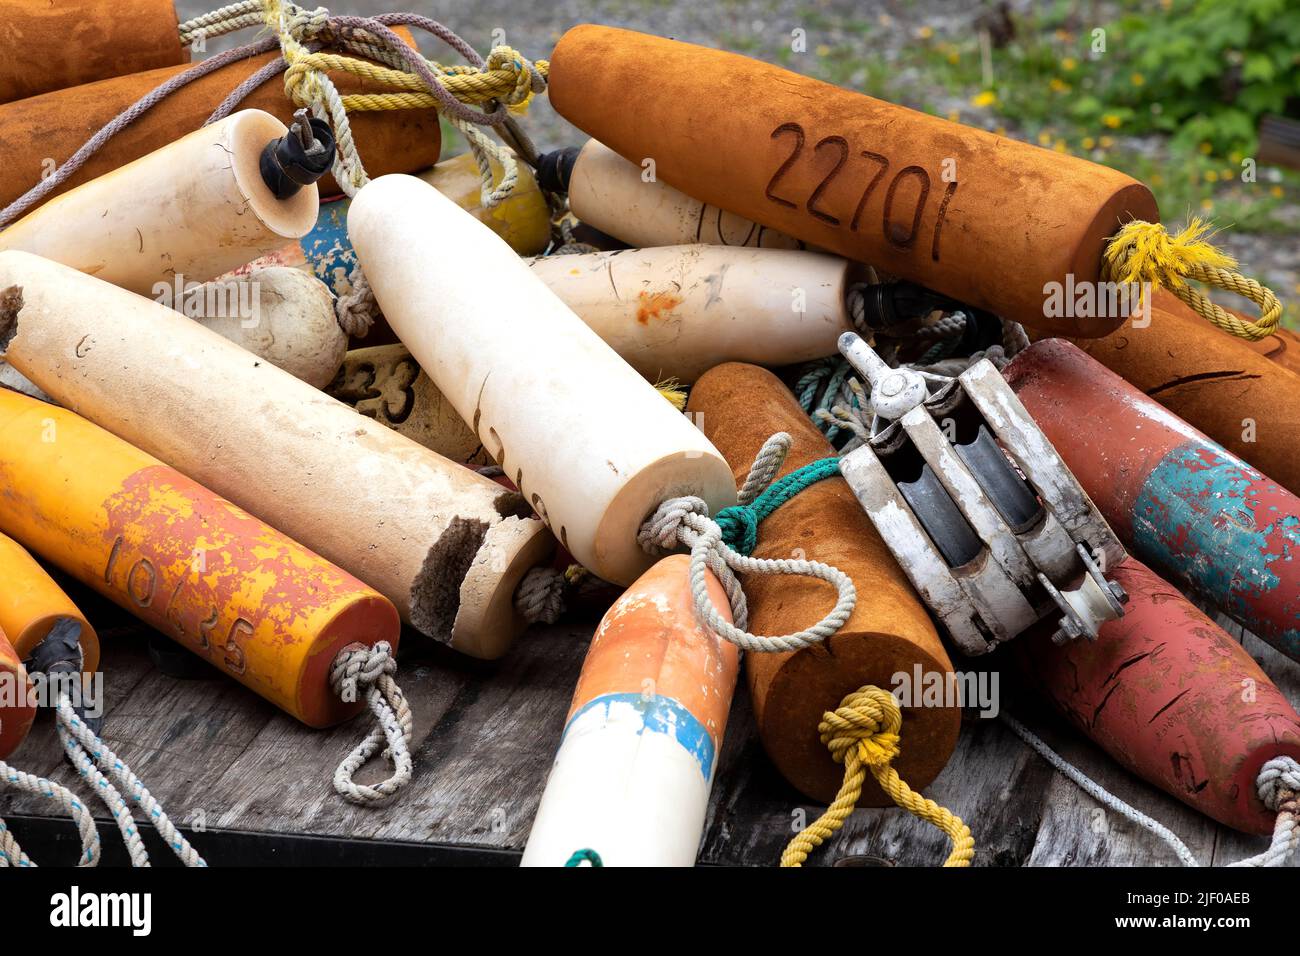 Floats for fishing net, Exponent of a museum, Cannery Museum, Icy Strait Point, Hoonah, Alaska, USA Stock Photo